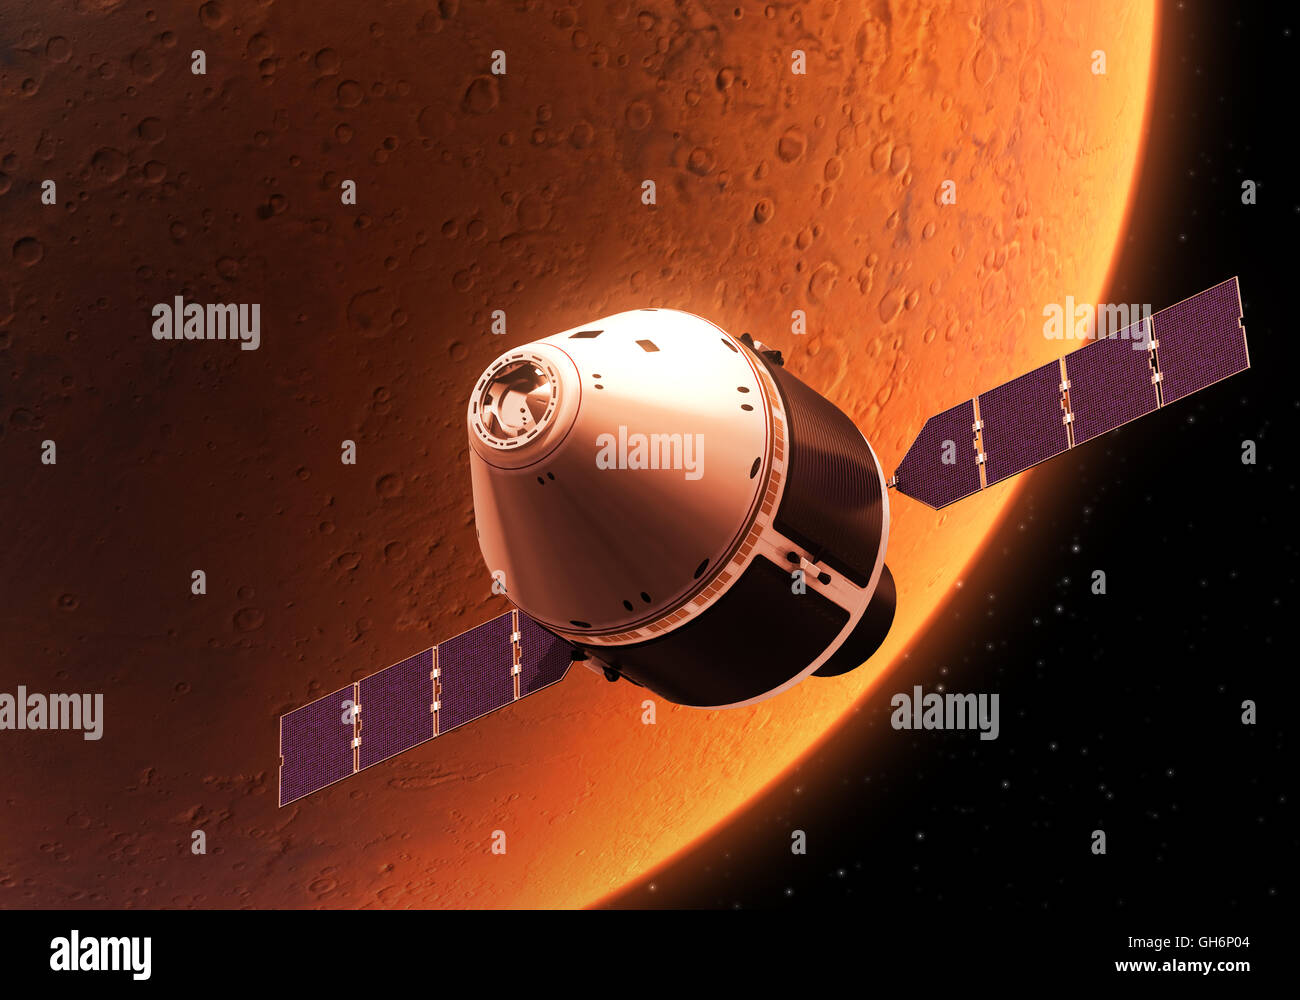 Spacecraft Orbiting Red Planet. Realistic 3D Illustration. Stock Photo